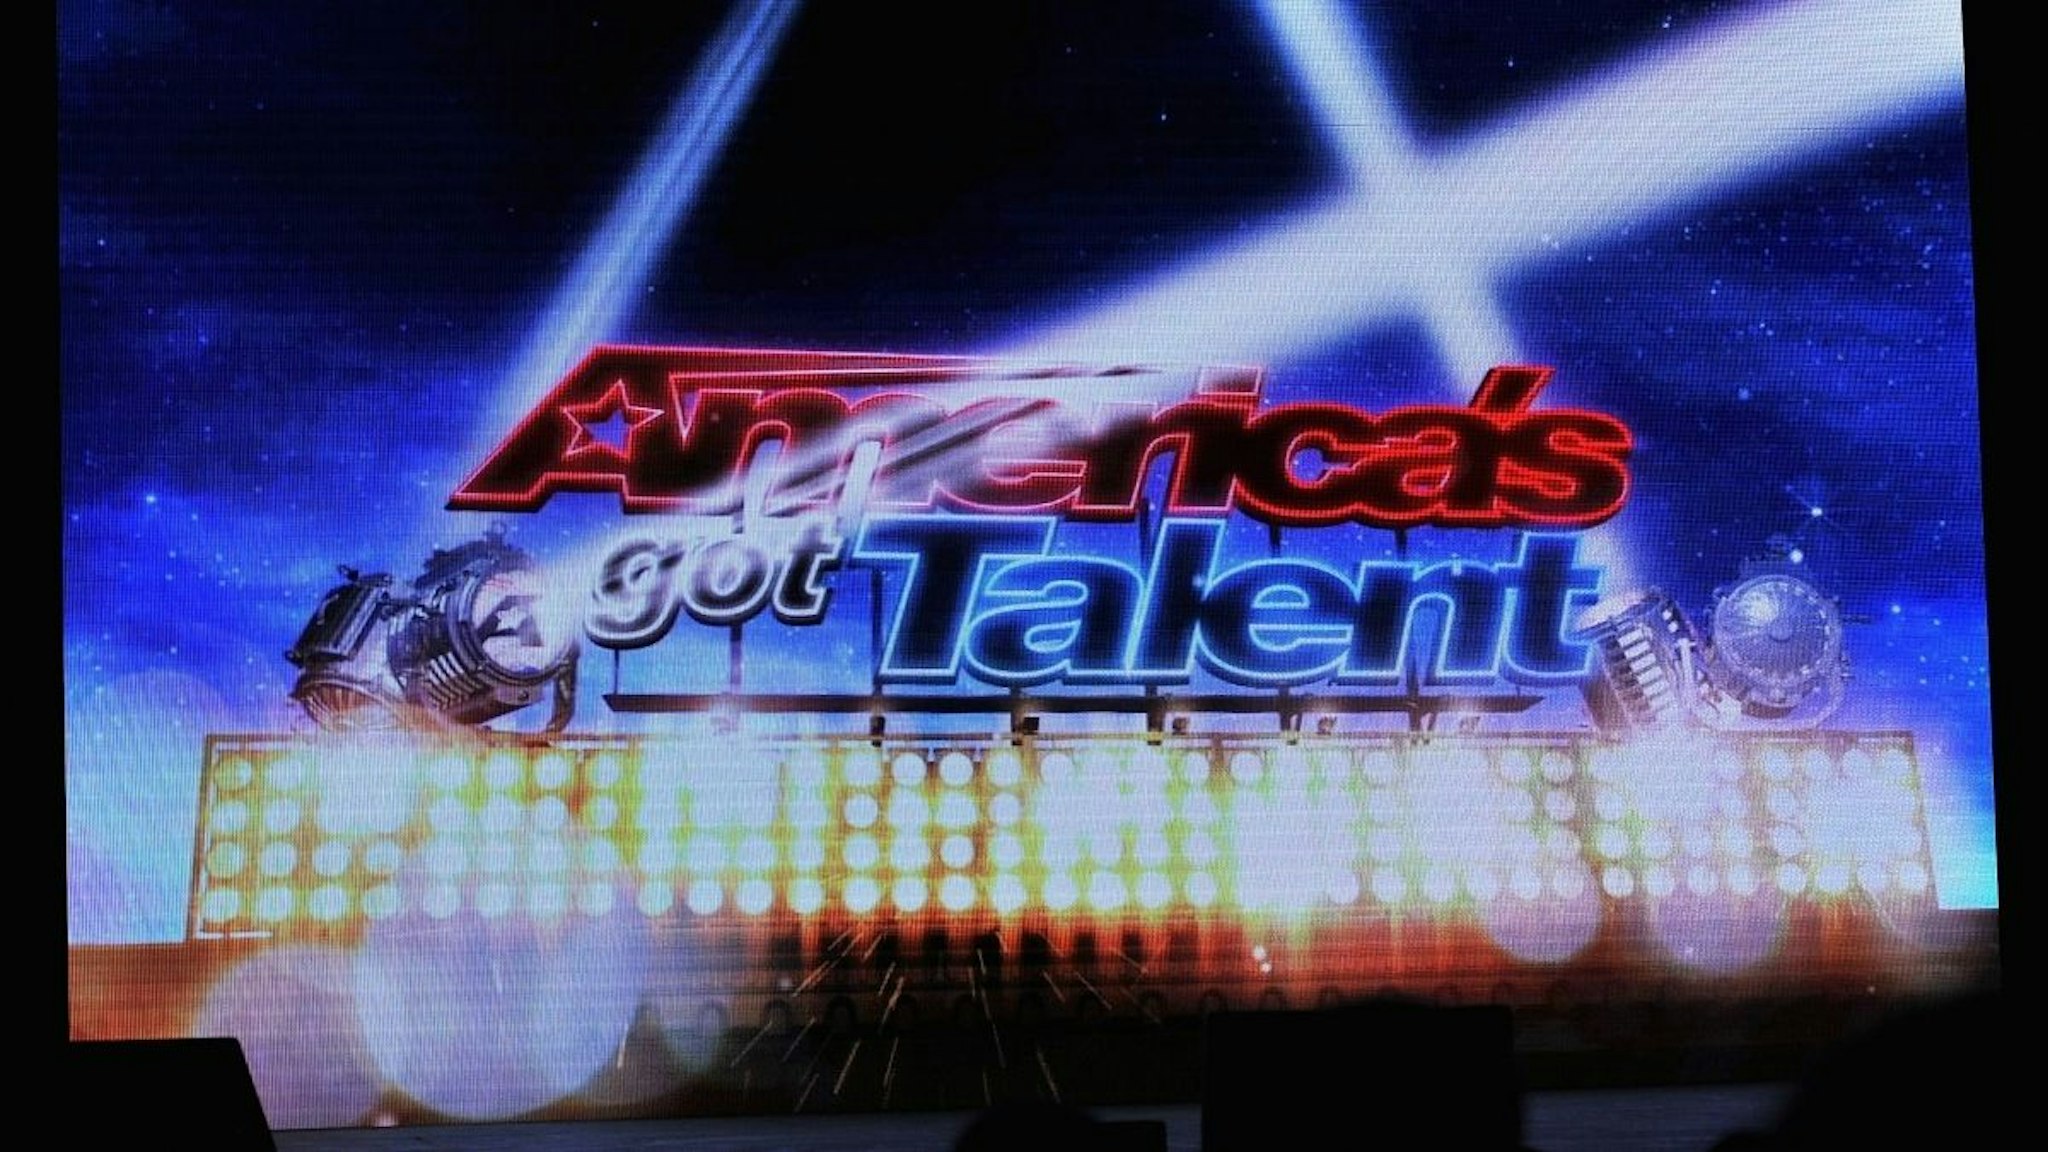 America's Got Talent Live! : The All Stars Tour logo captured on the big screen onstage during opening night on October 6, 2015 in Salina, Kansas.